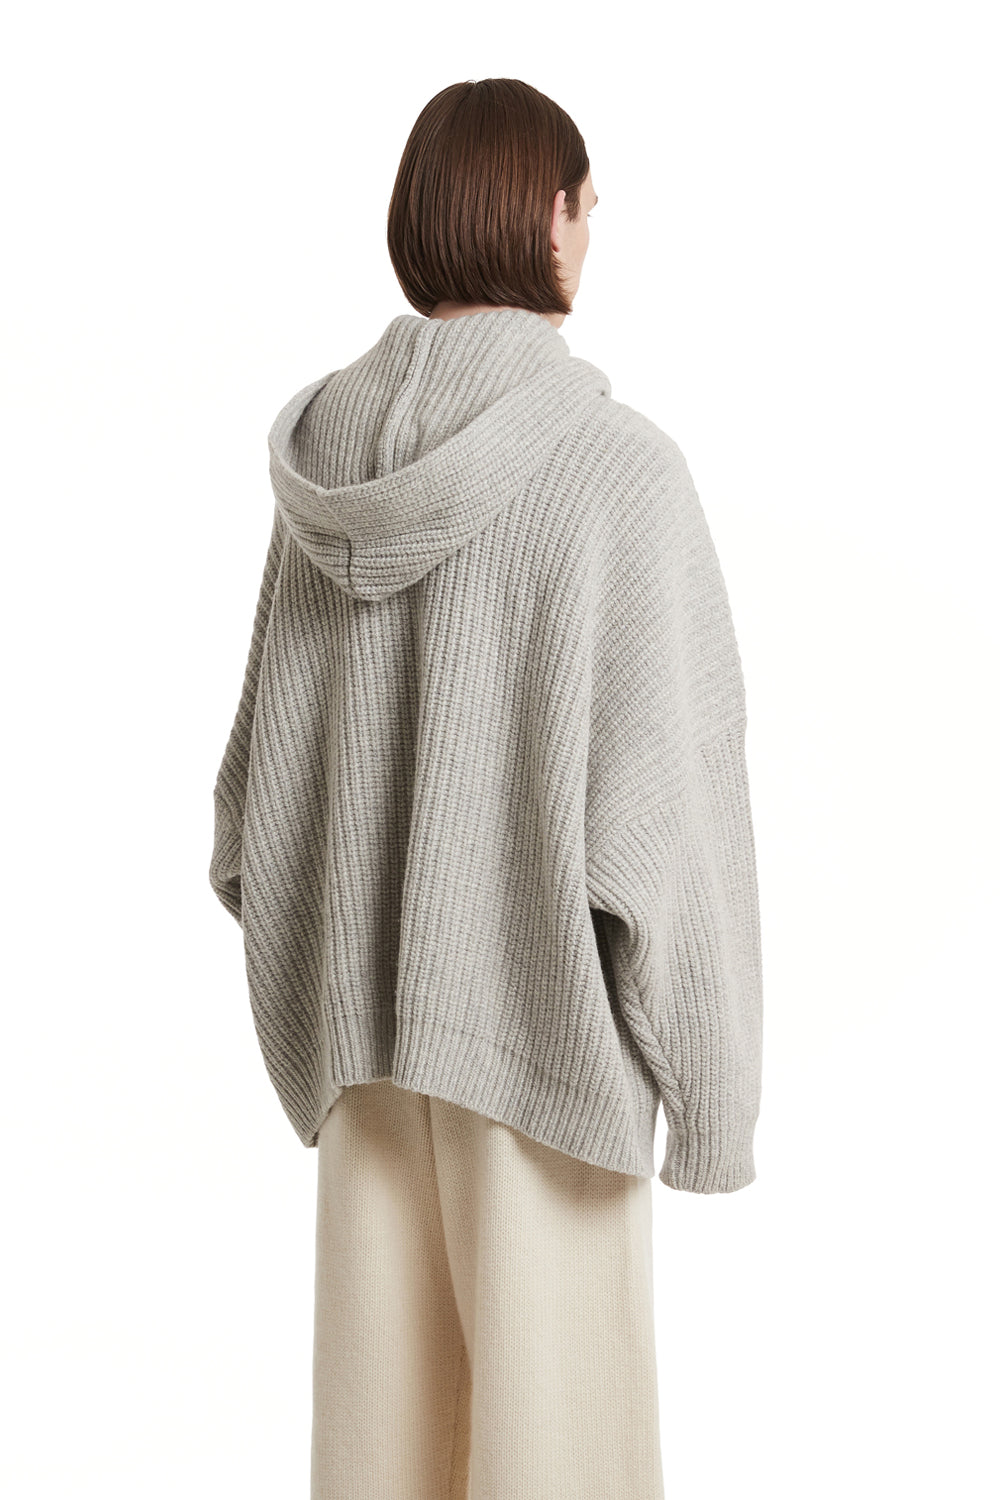 TRUNK PROJECT Grey Hoodie Knit Cardigan